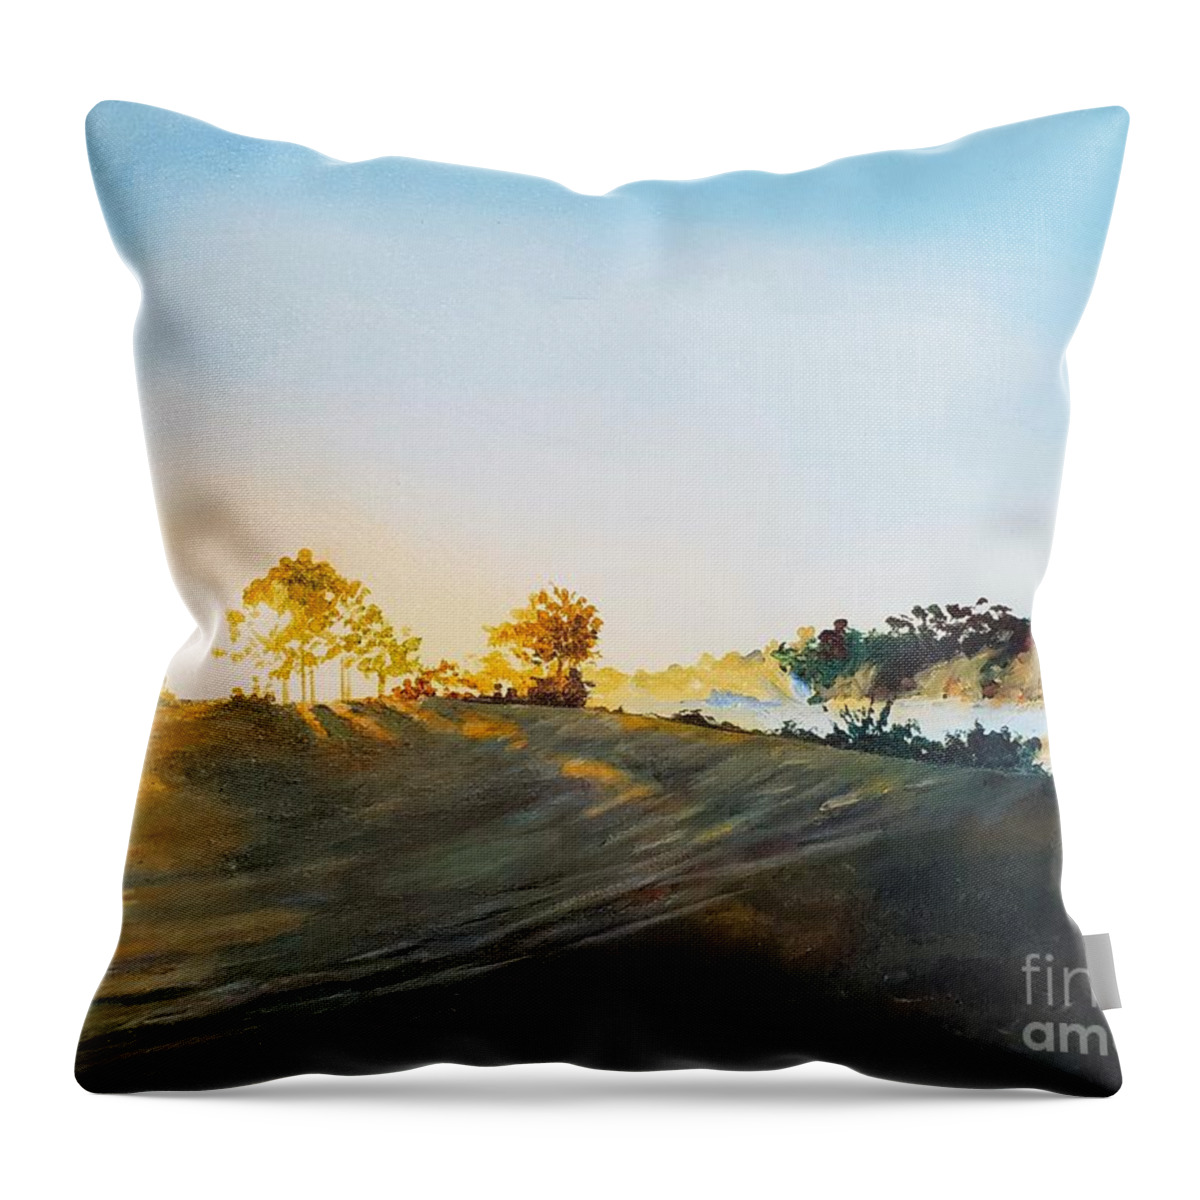 Florida Throw Pillow featuring the painting Florida Winter Dawn by Merana Cadorette